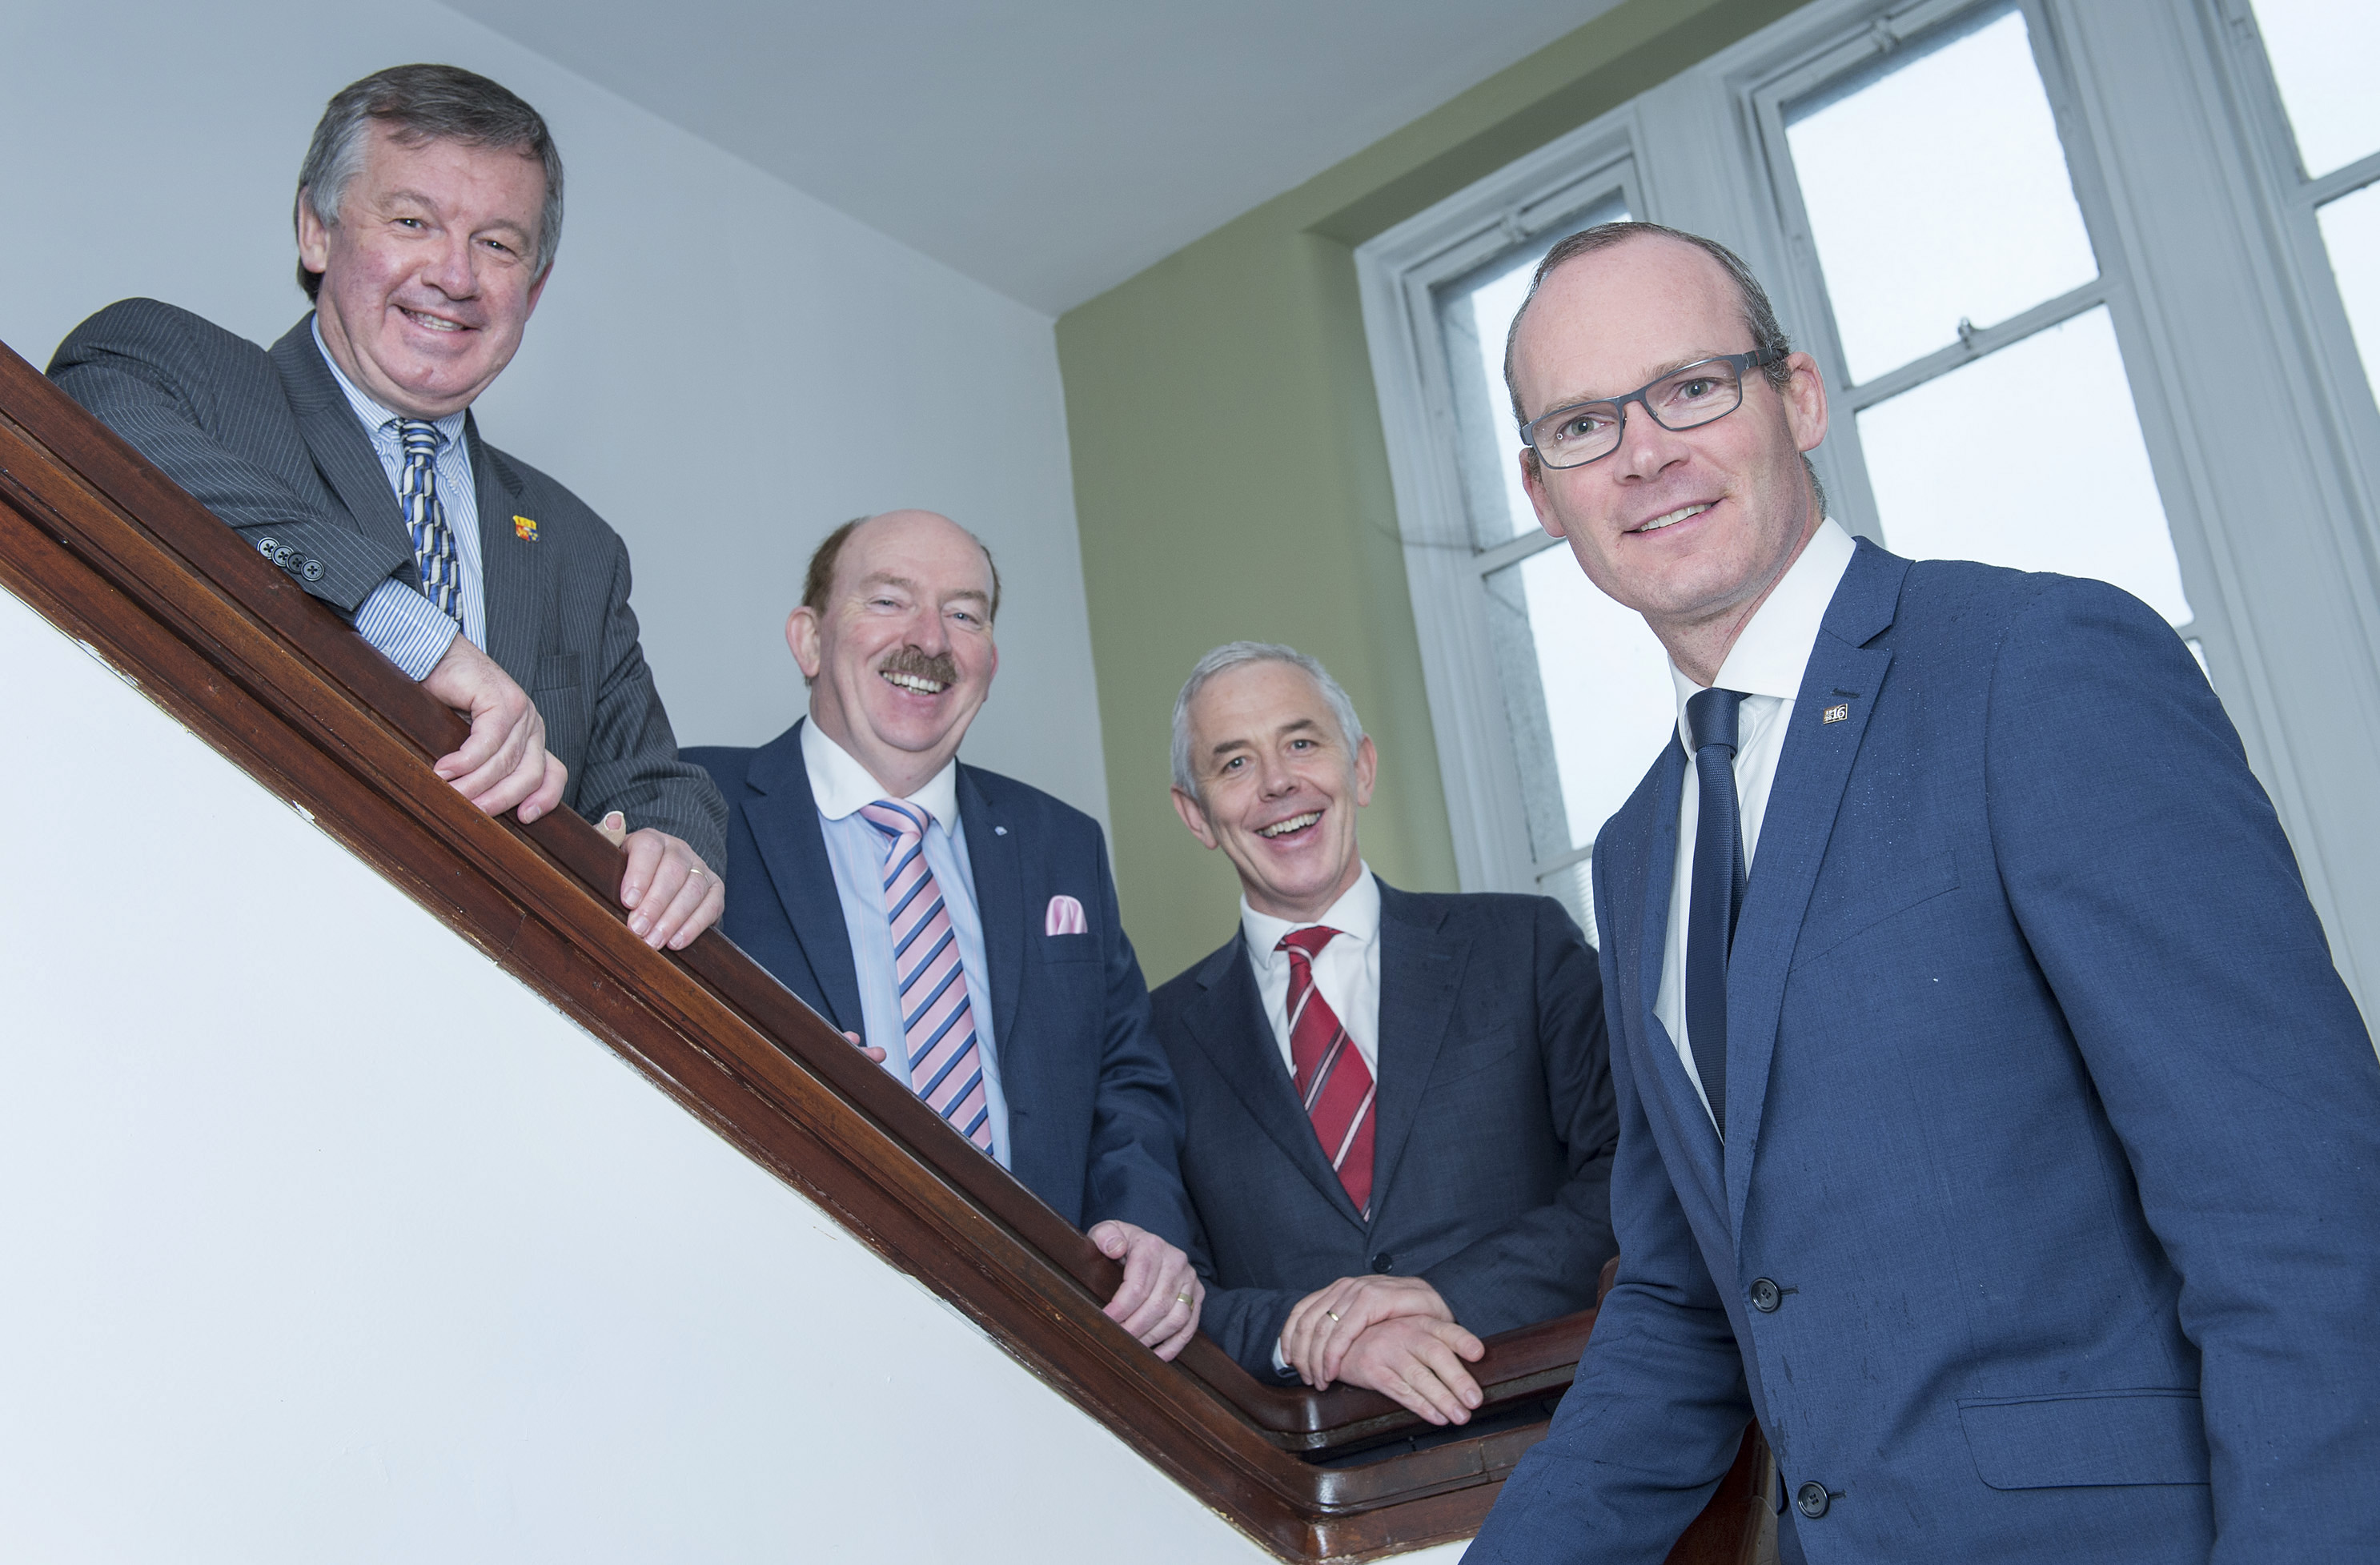 New home ‘delivered’ for UCC’s College of Medicine and Health